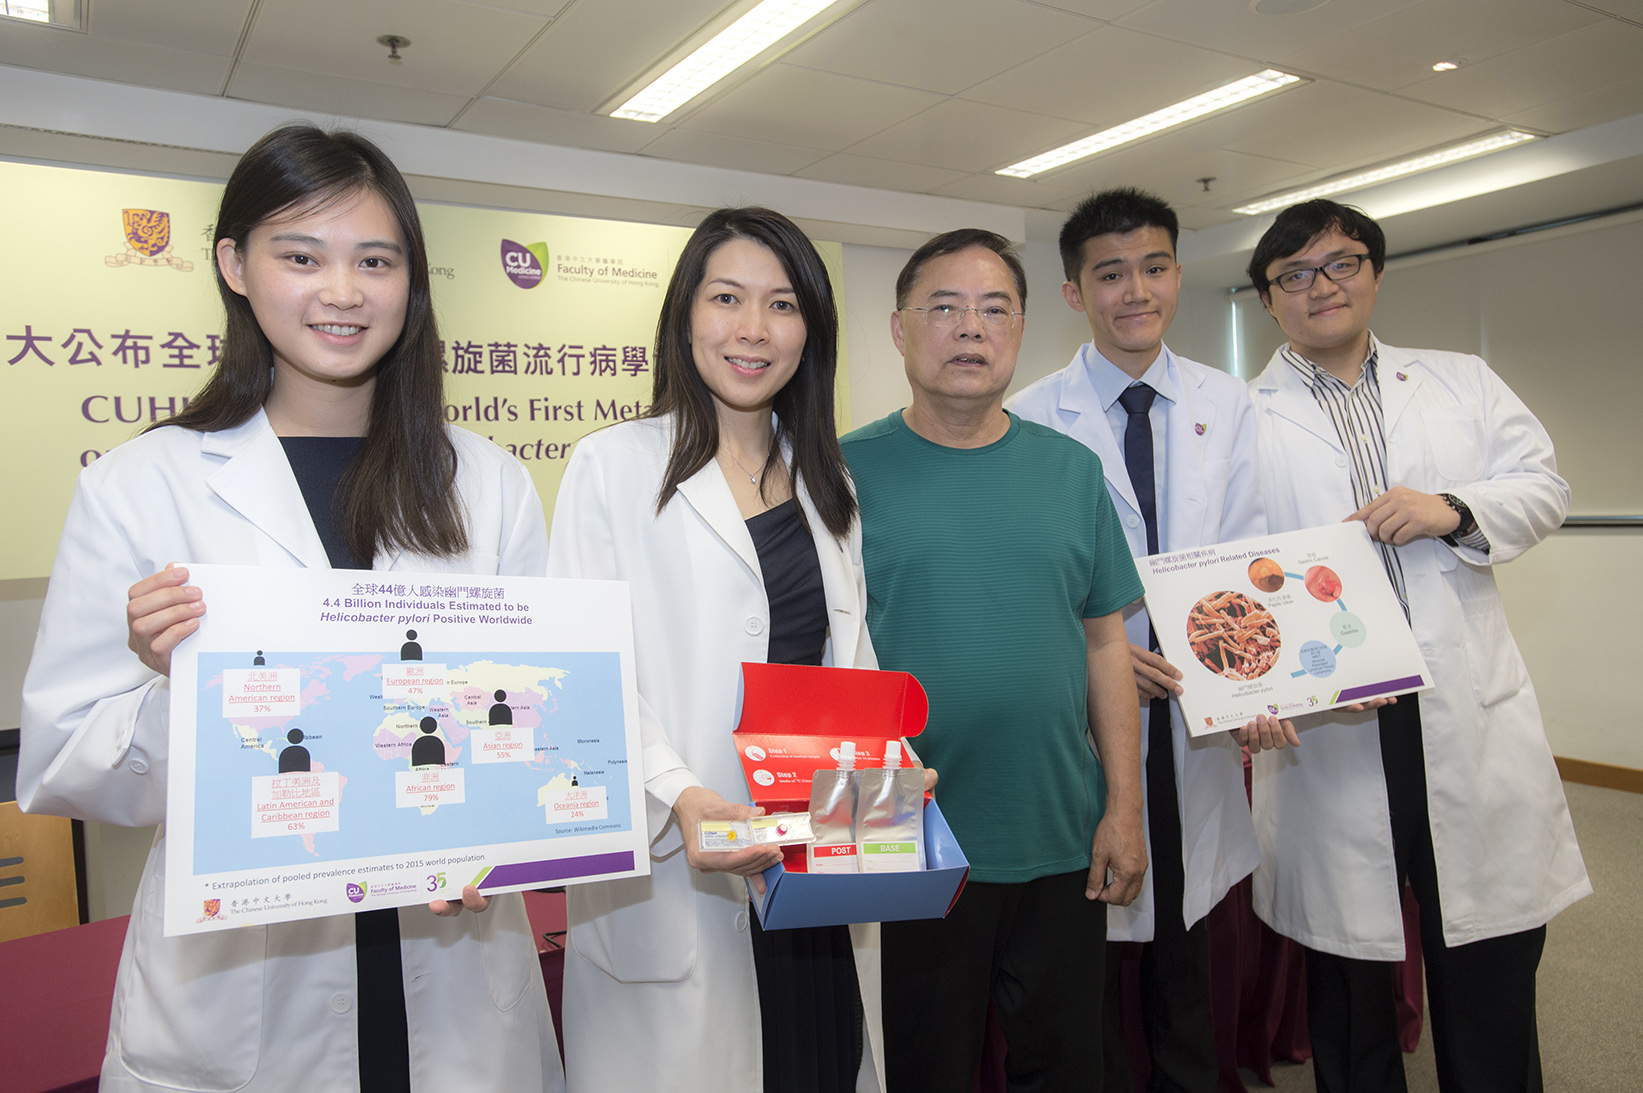 A research team formed by gastroenterologists including Prof. Siew NG (2nd from left) from the Department of Medicine and Therapeutics, Faculty of Medicine at CUHK and CUHK Medicine Year 5 students including Ms Lily LAI (1st from left), Mr Michael SUEN (2nd from right) and Mr James HOOI (1st from right), found that 4.4 billion people worldwide are infected with Helicobacter pylori. Mr LO (middle) shares his experience of Helicobacter pylori infection at the press conference.